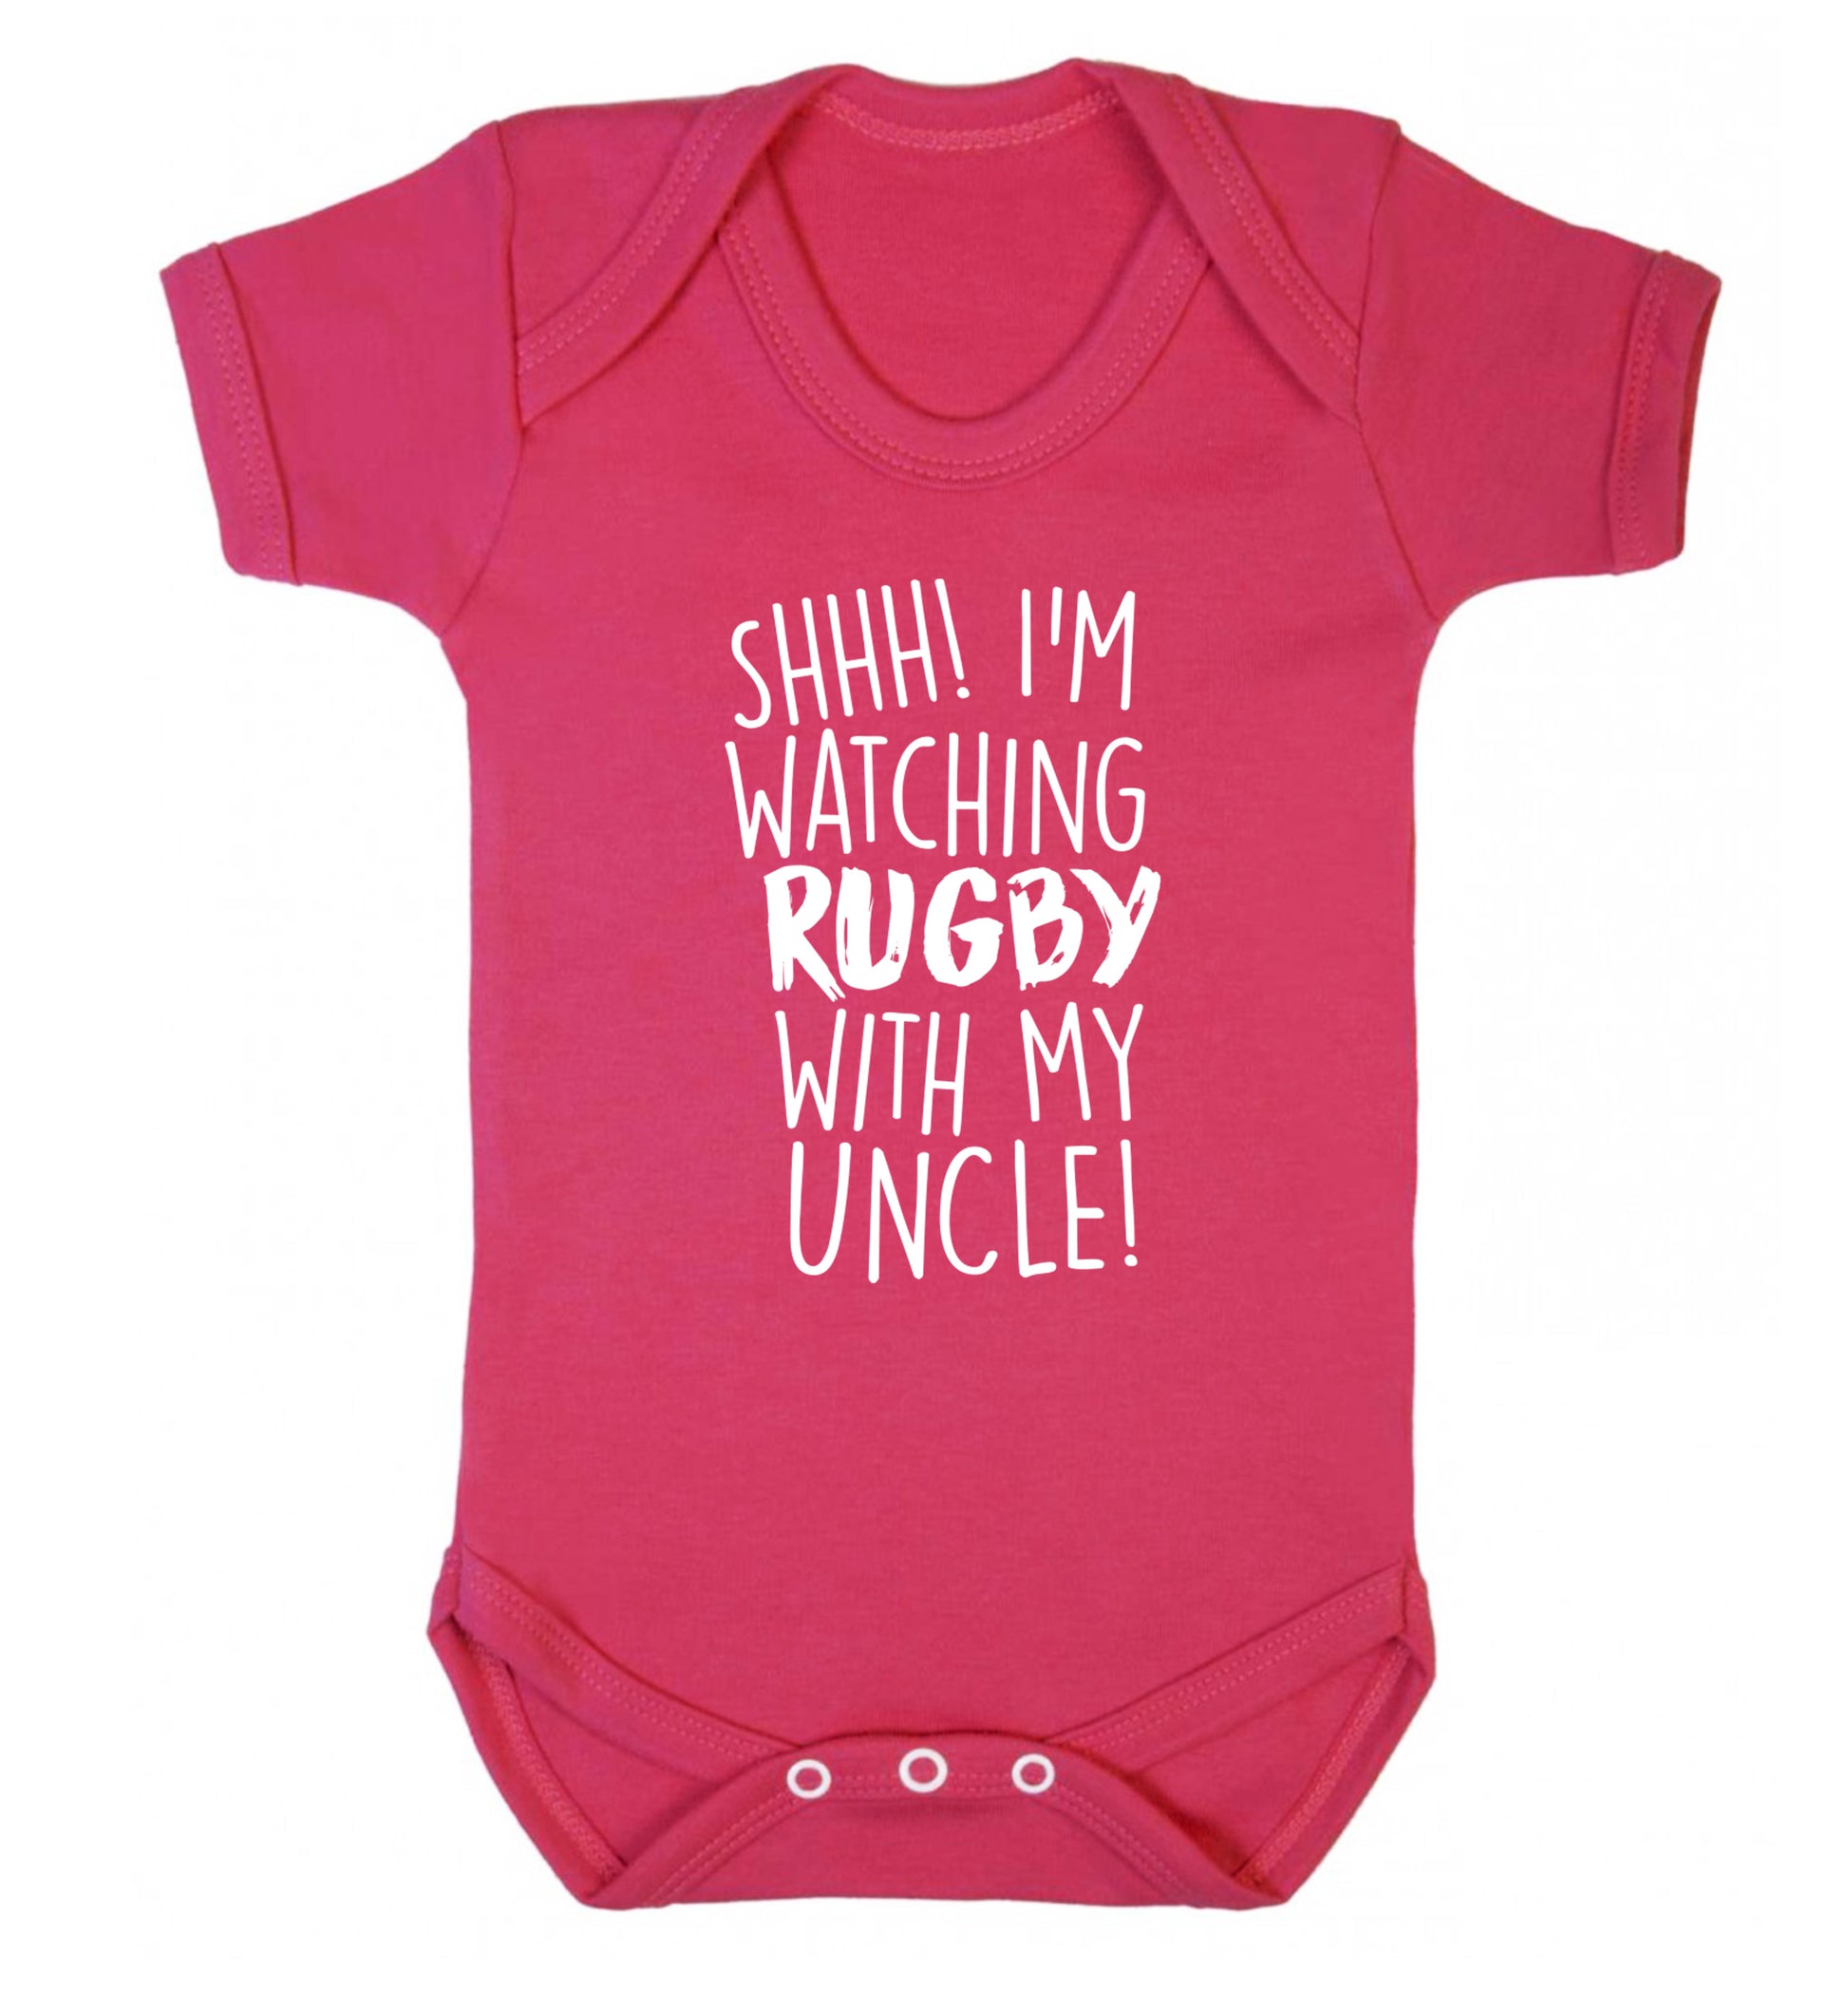 Shh.. I'm watching rugby with my uncle Baby Vest dark pink 18-24 months